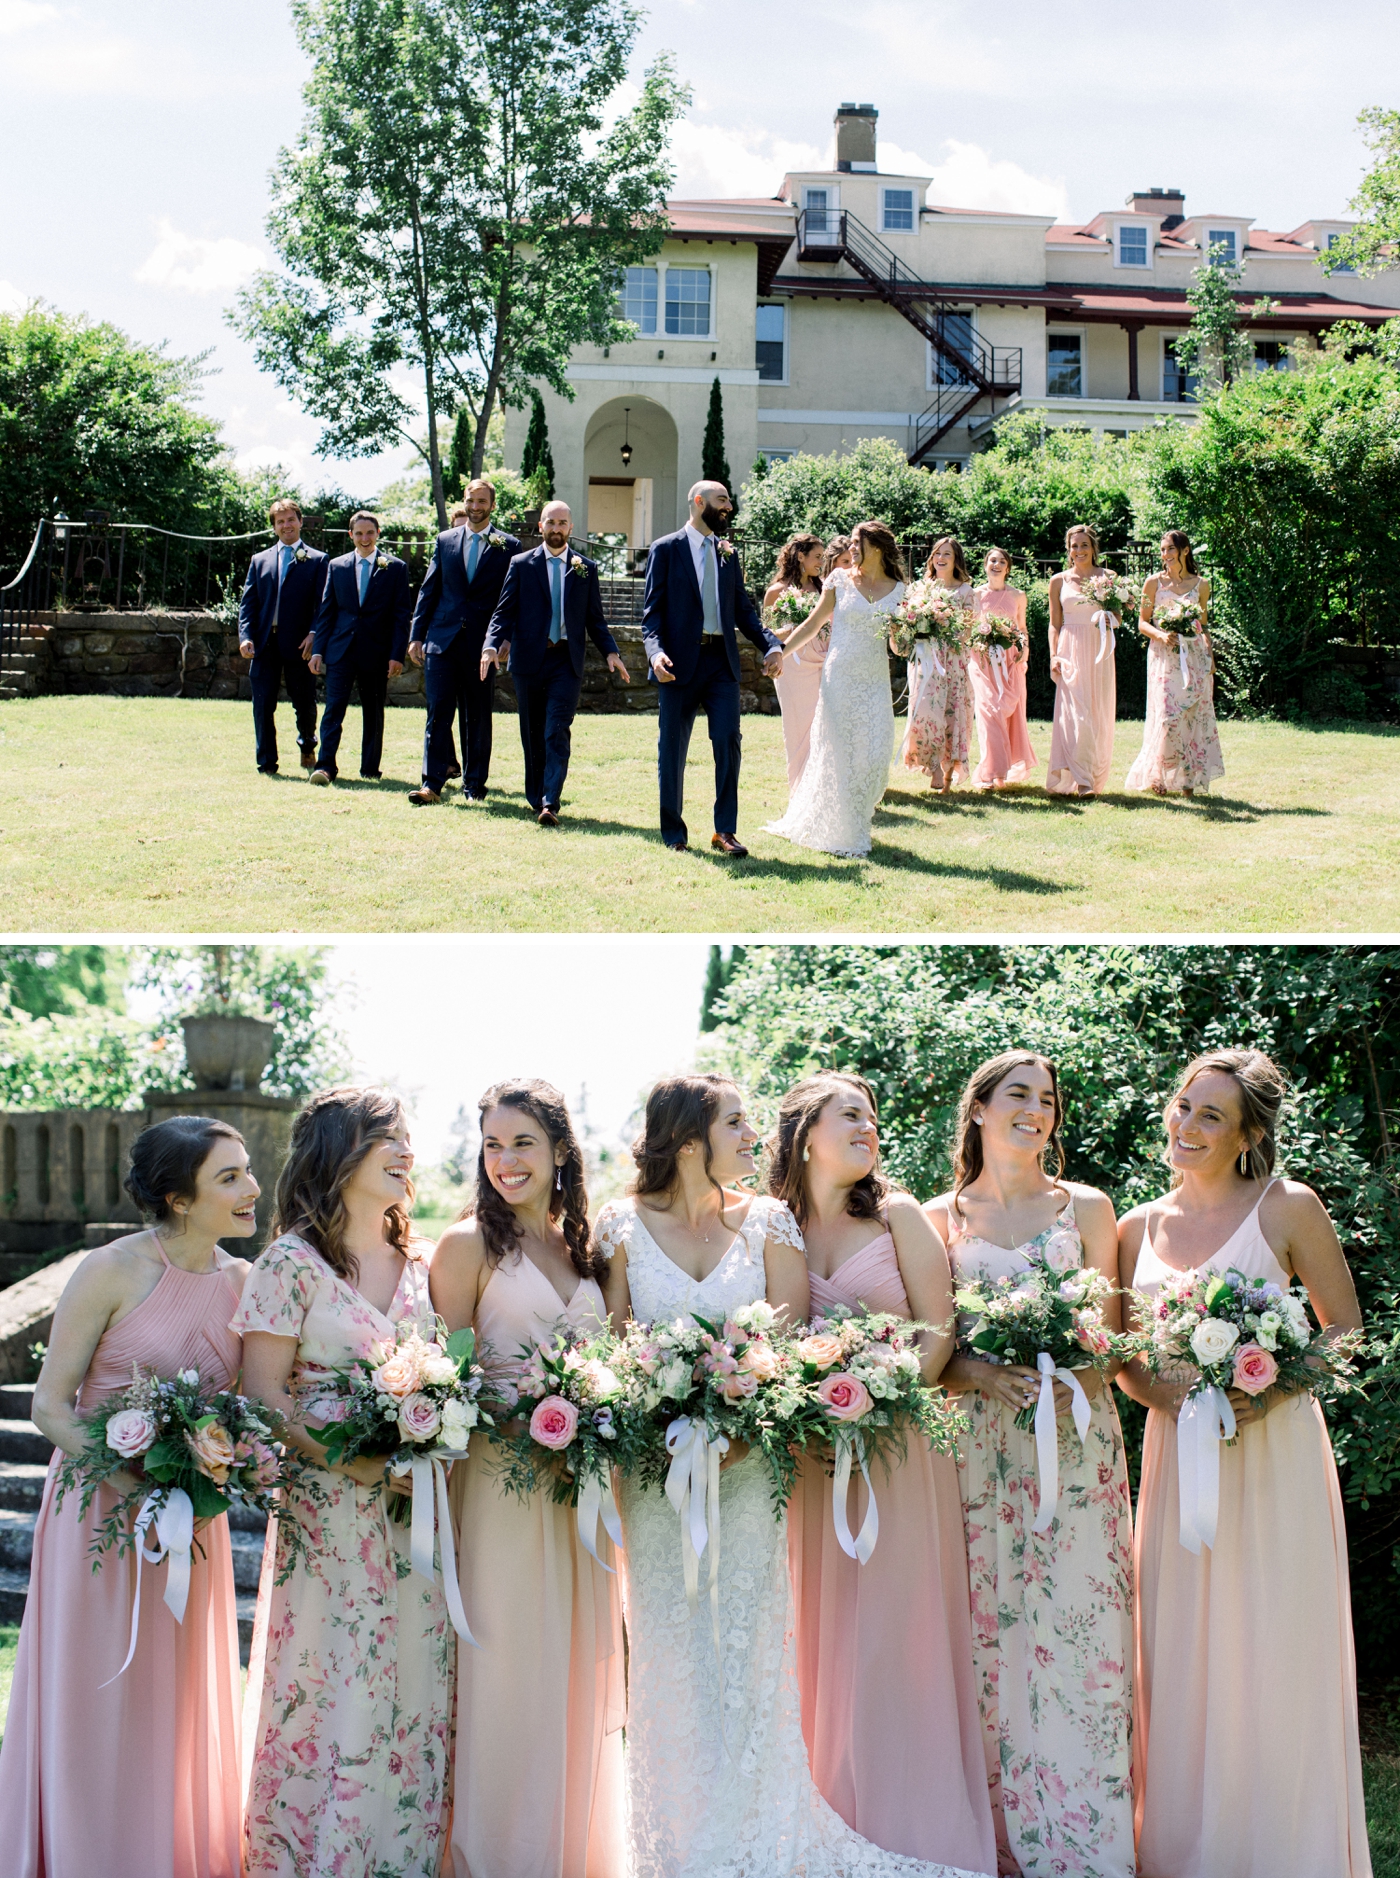 Bridesmaids in blush and floral gowns